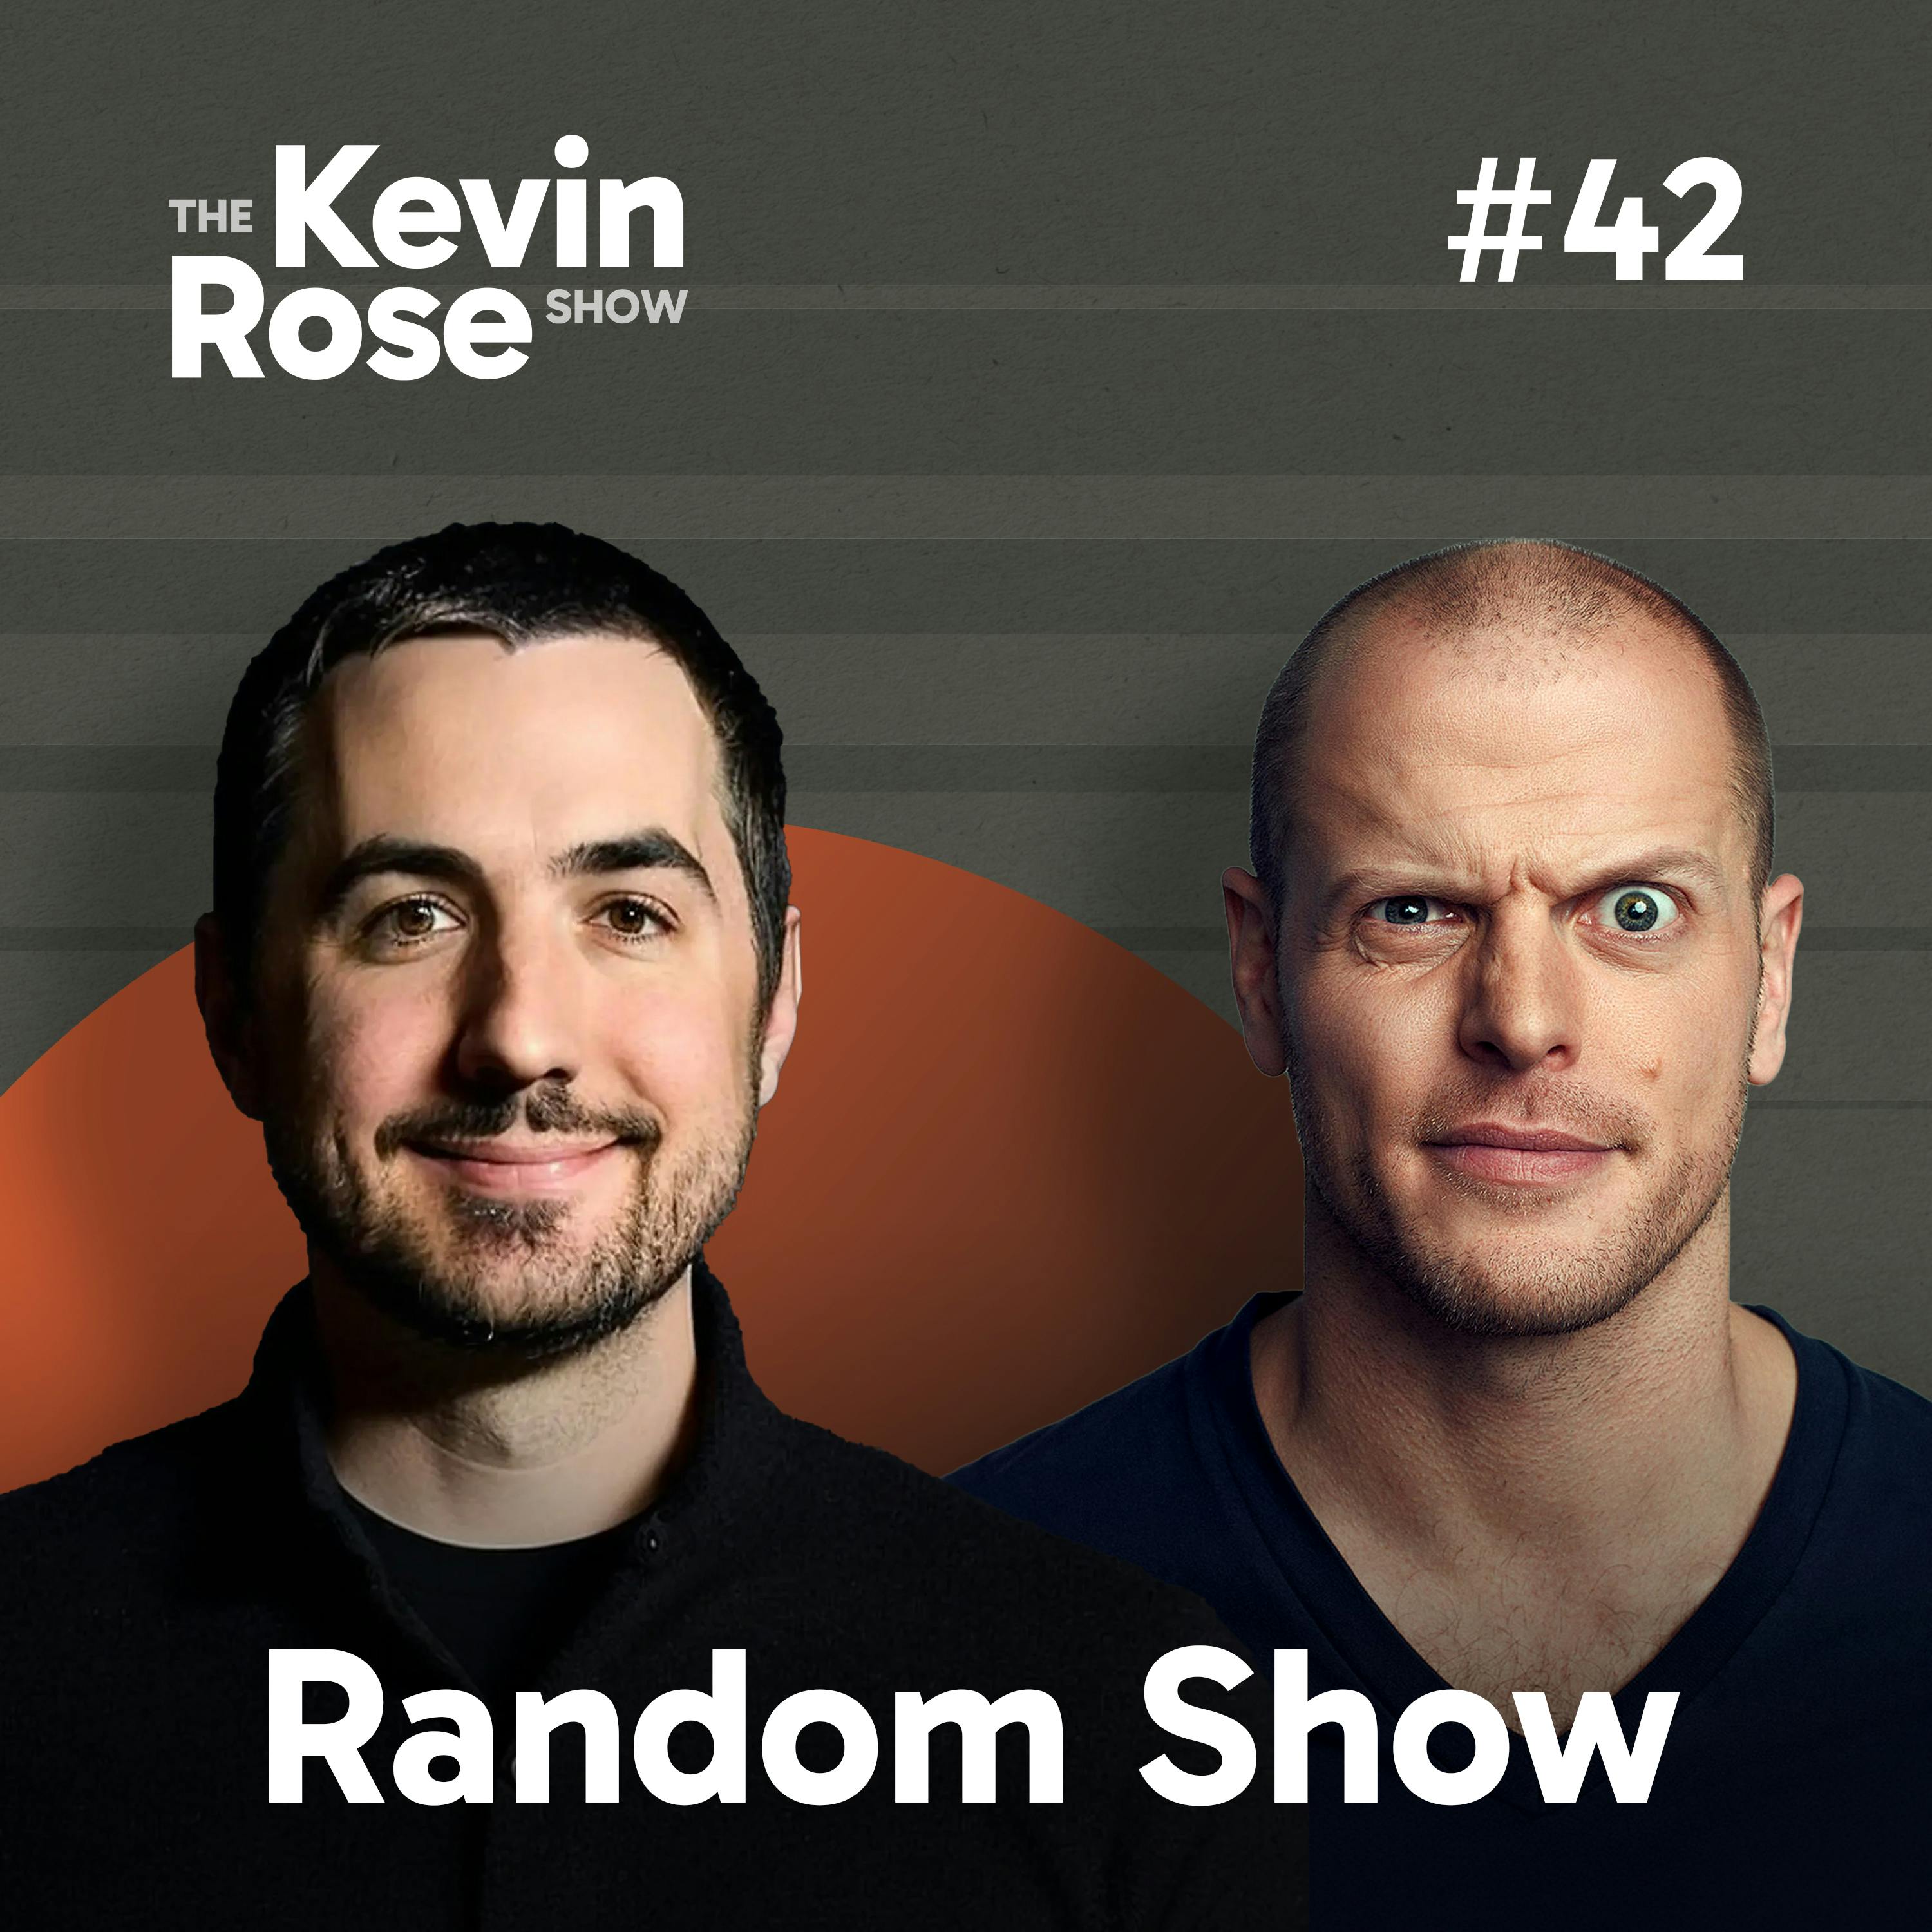 Tim Ferriss, The Random Show, Zen, Investing, Mike Tyson, Artificial Intelligence, and the World’s Best Beers (#42)